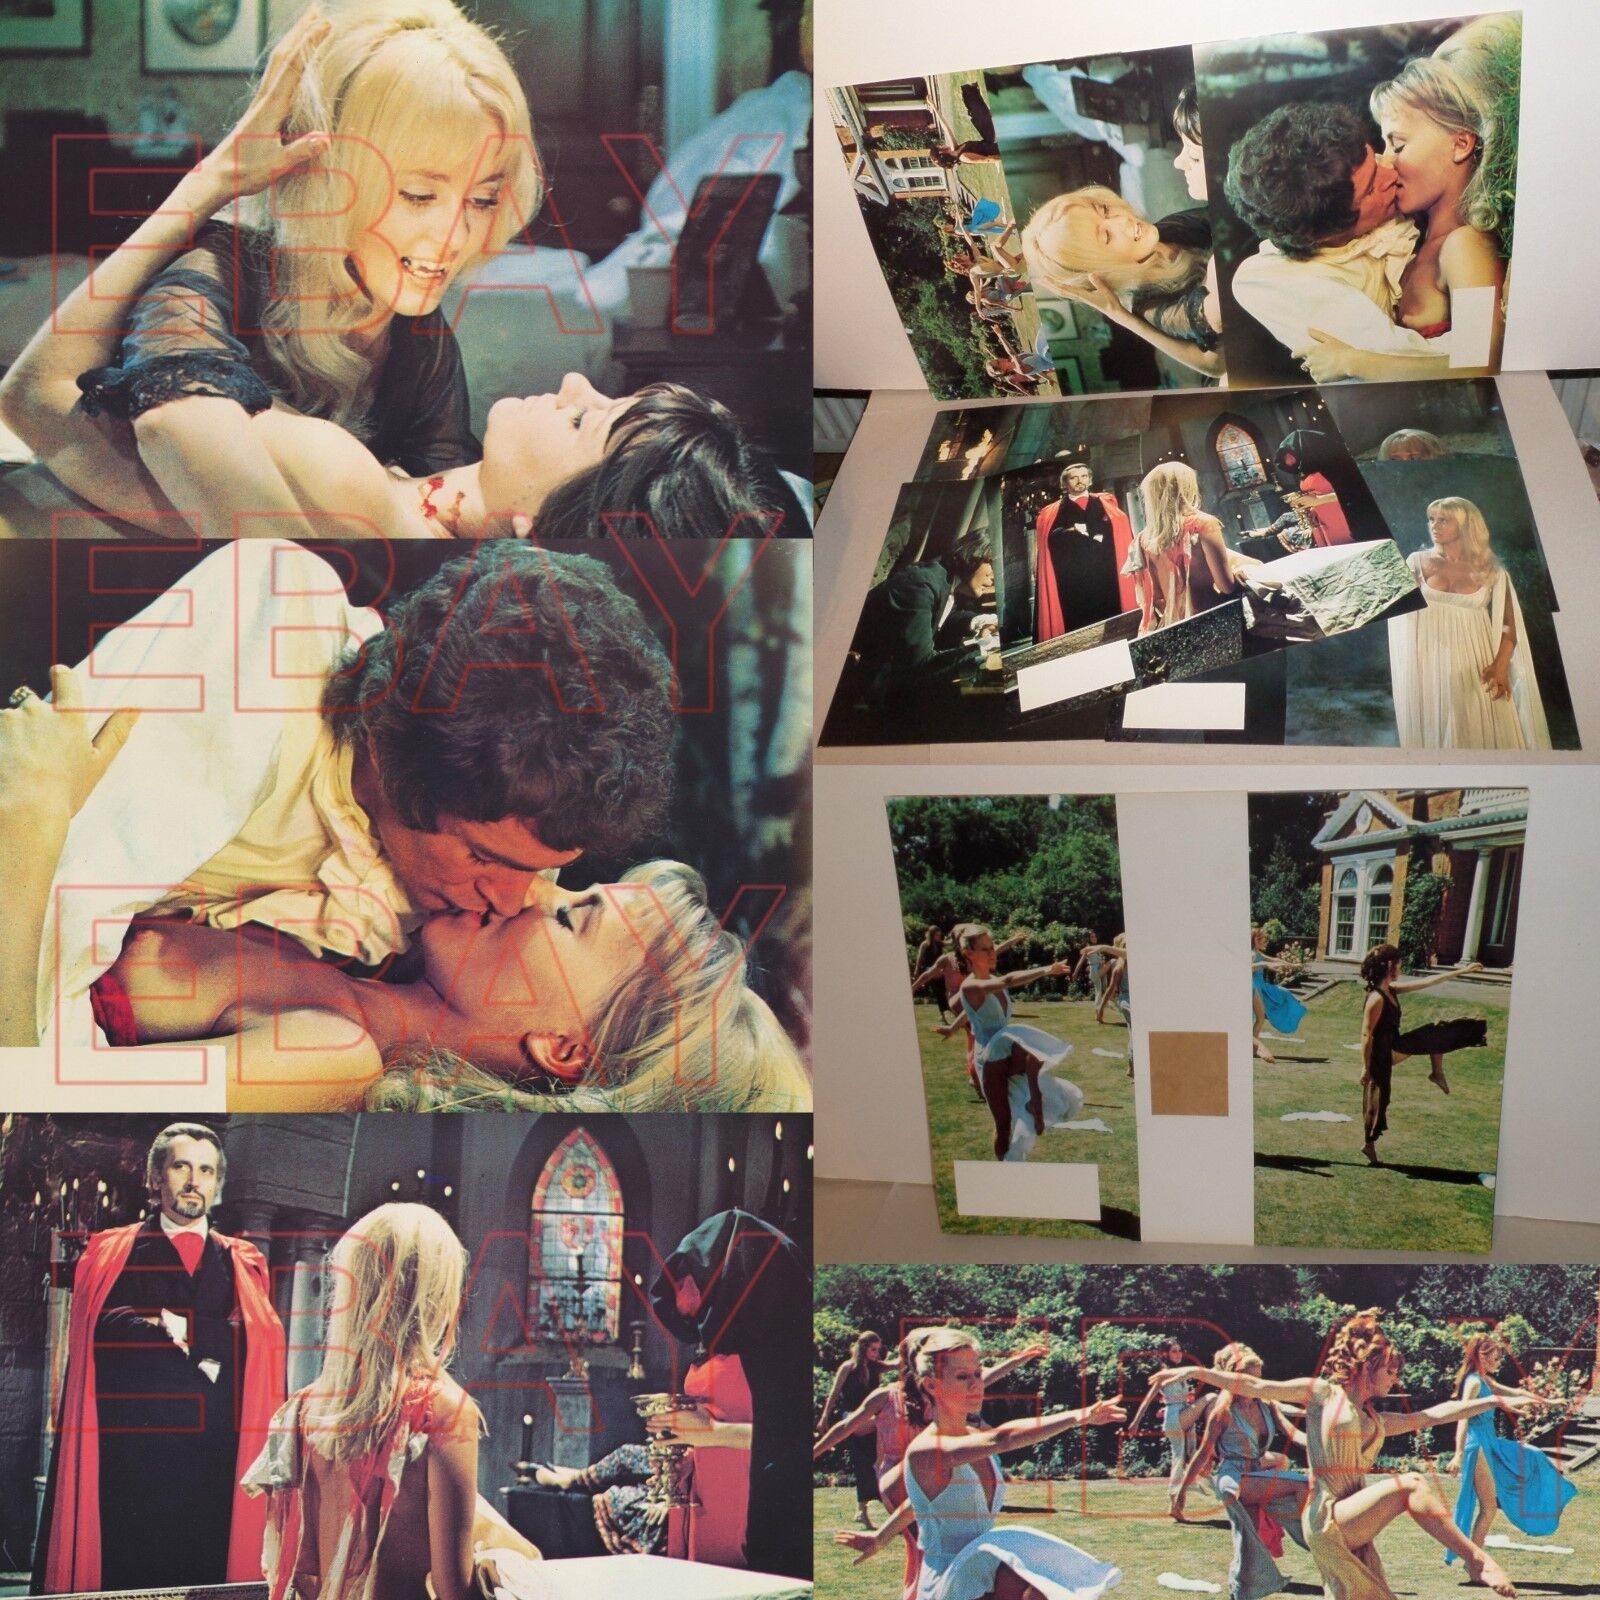 1971 LUST FOR A VAMPIRE Lobby set HAMMER STENS horror Challenge the lowest price YUTTE wholesale card